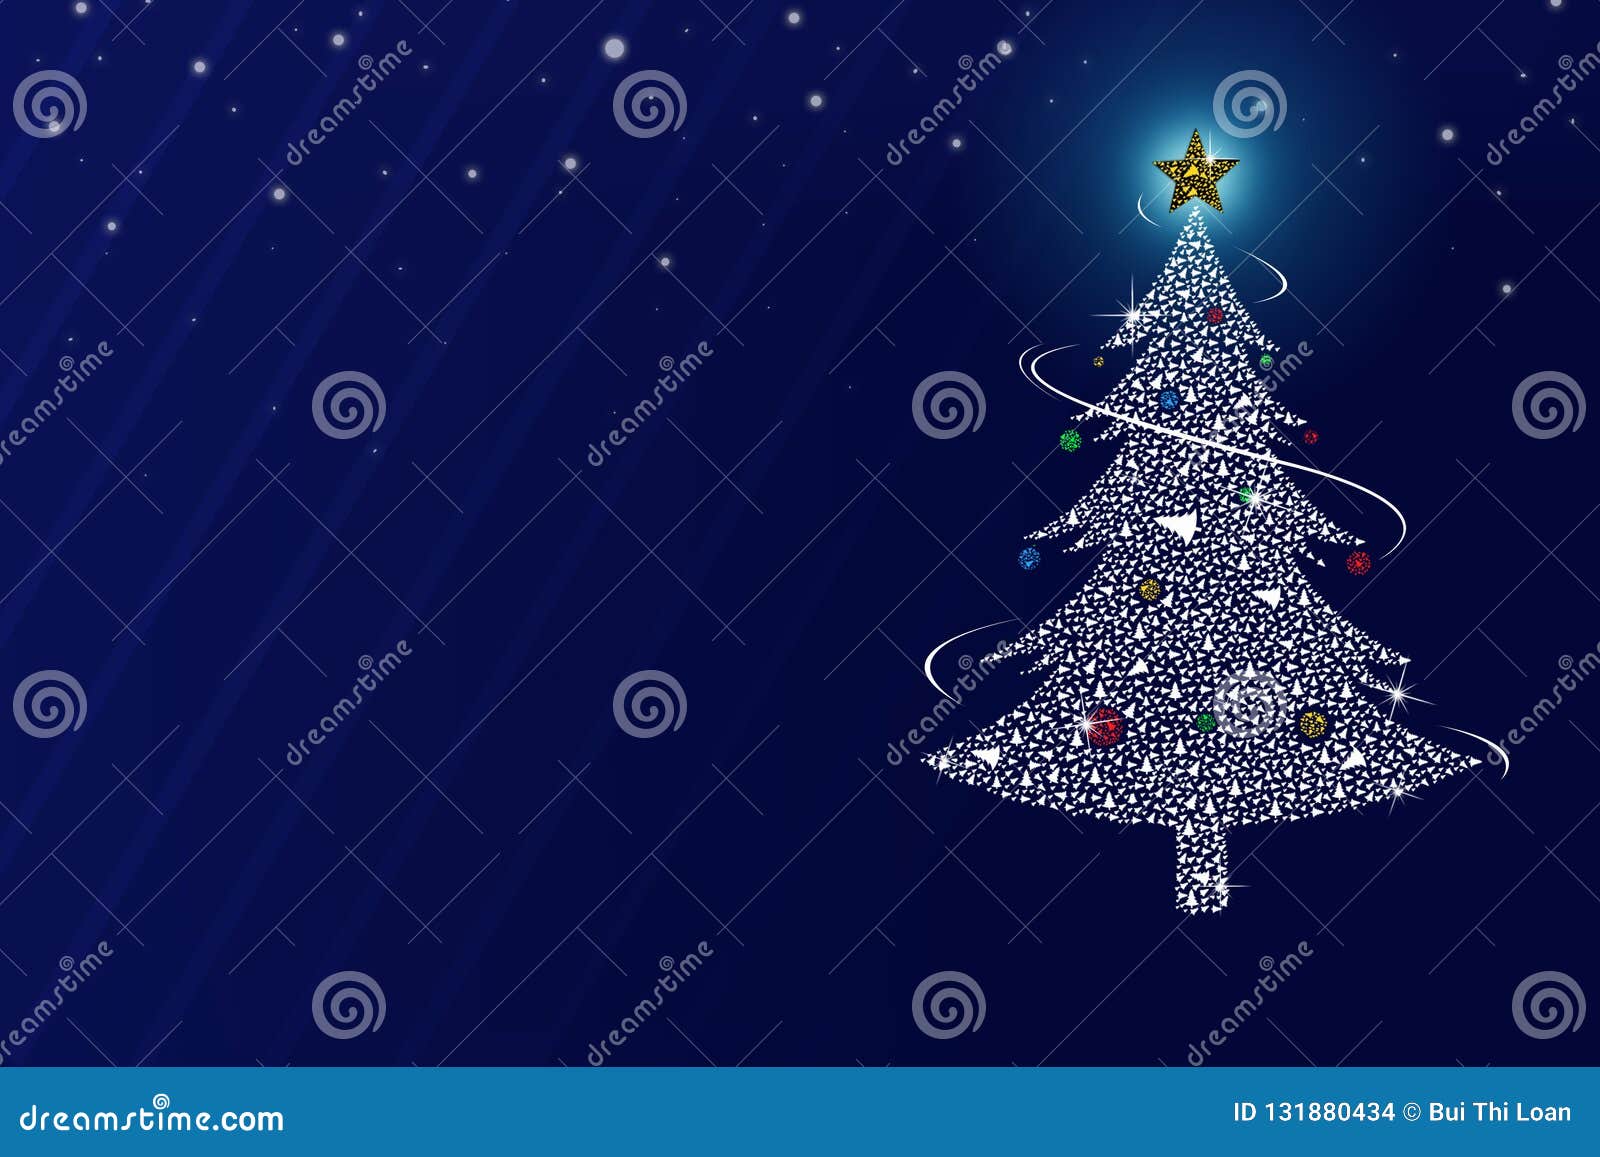 abtract christmas tree on the blue background